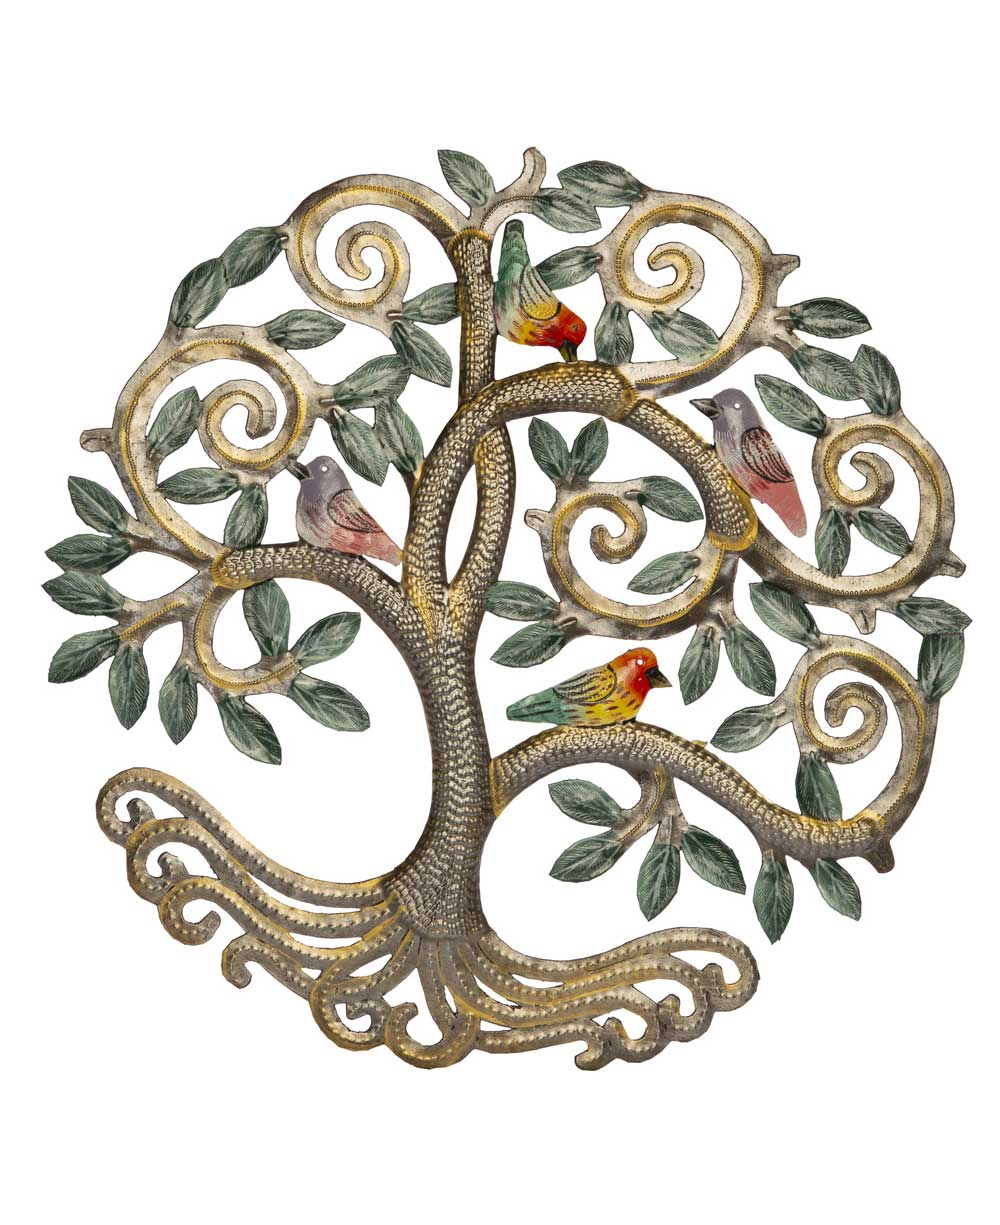 Haiti Tree of Life Wall hanging with Songbirds